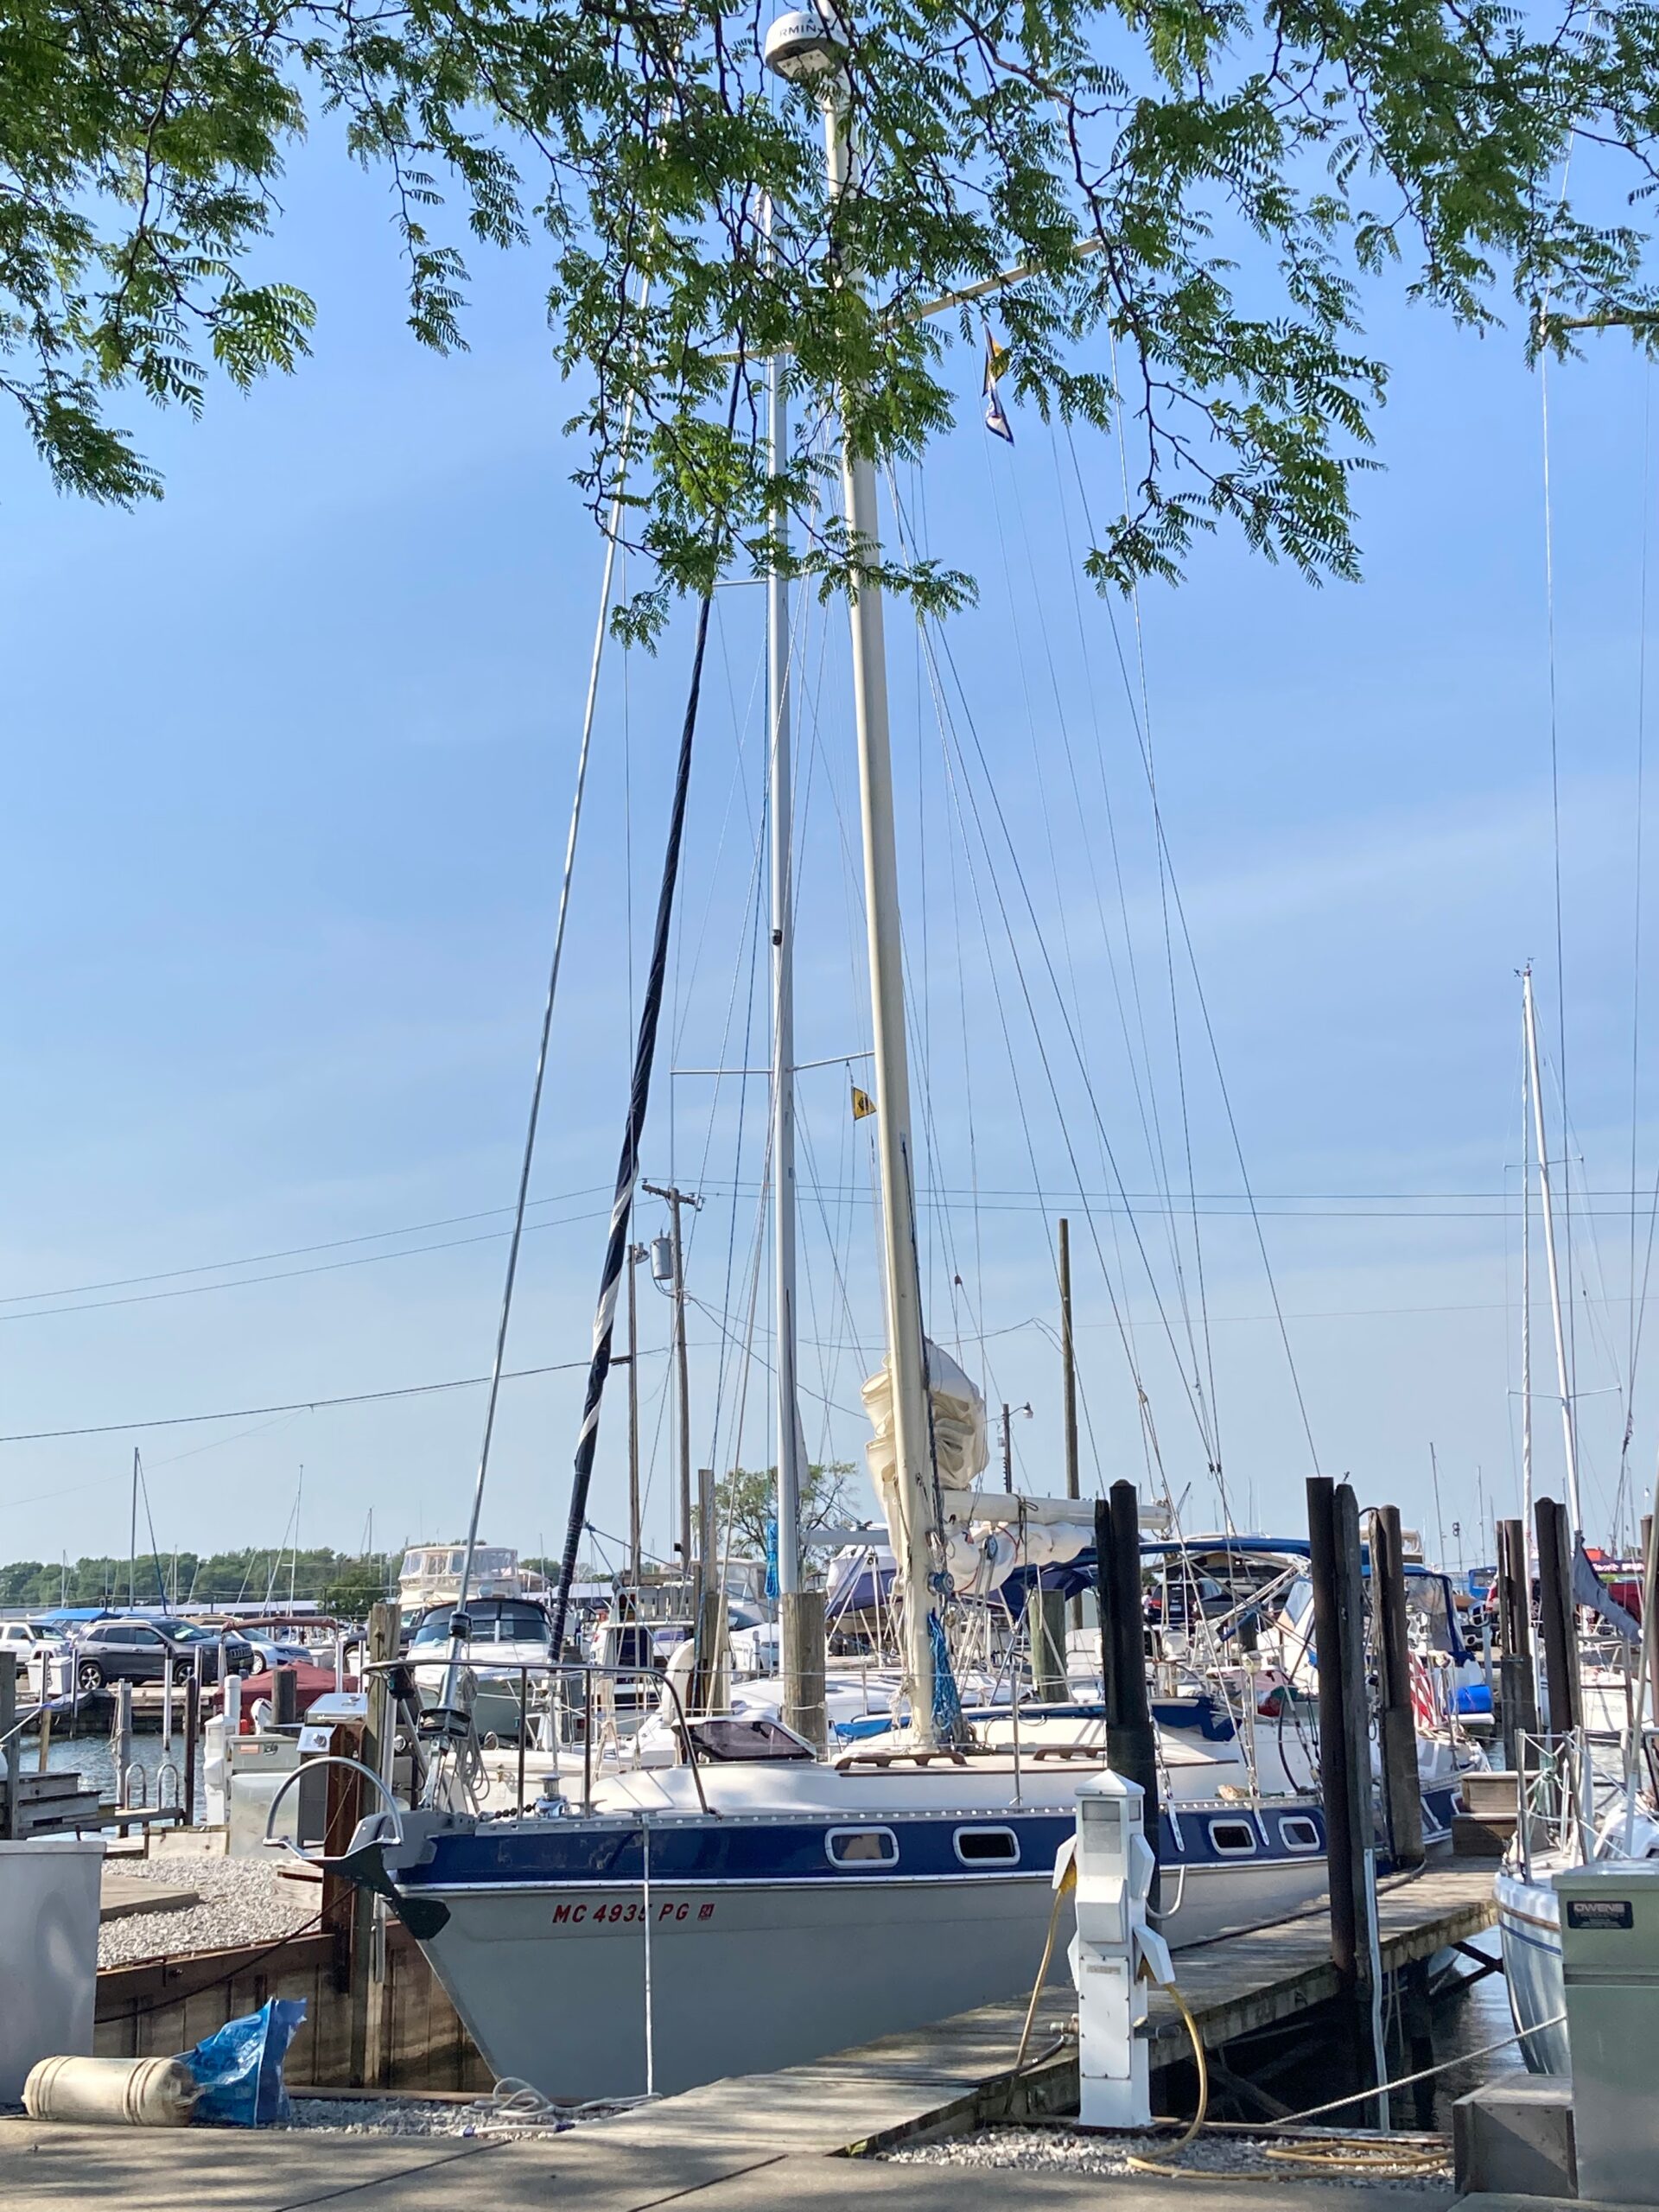 Great Lakes Yacht Club